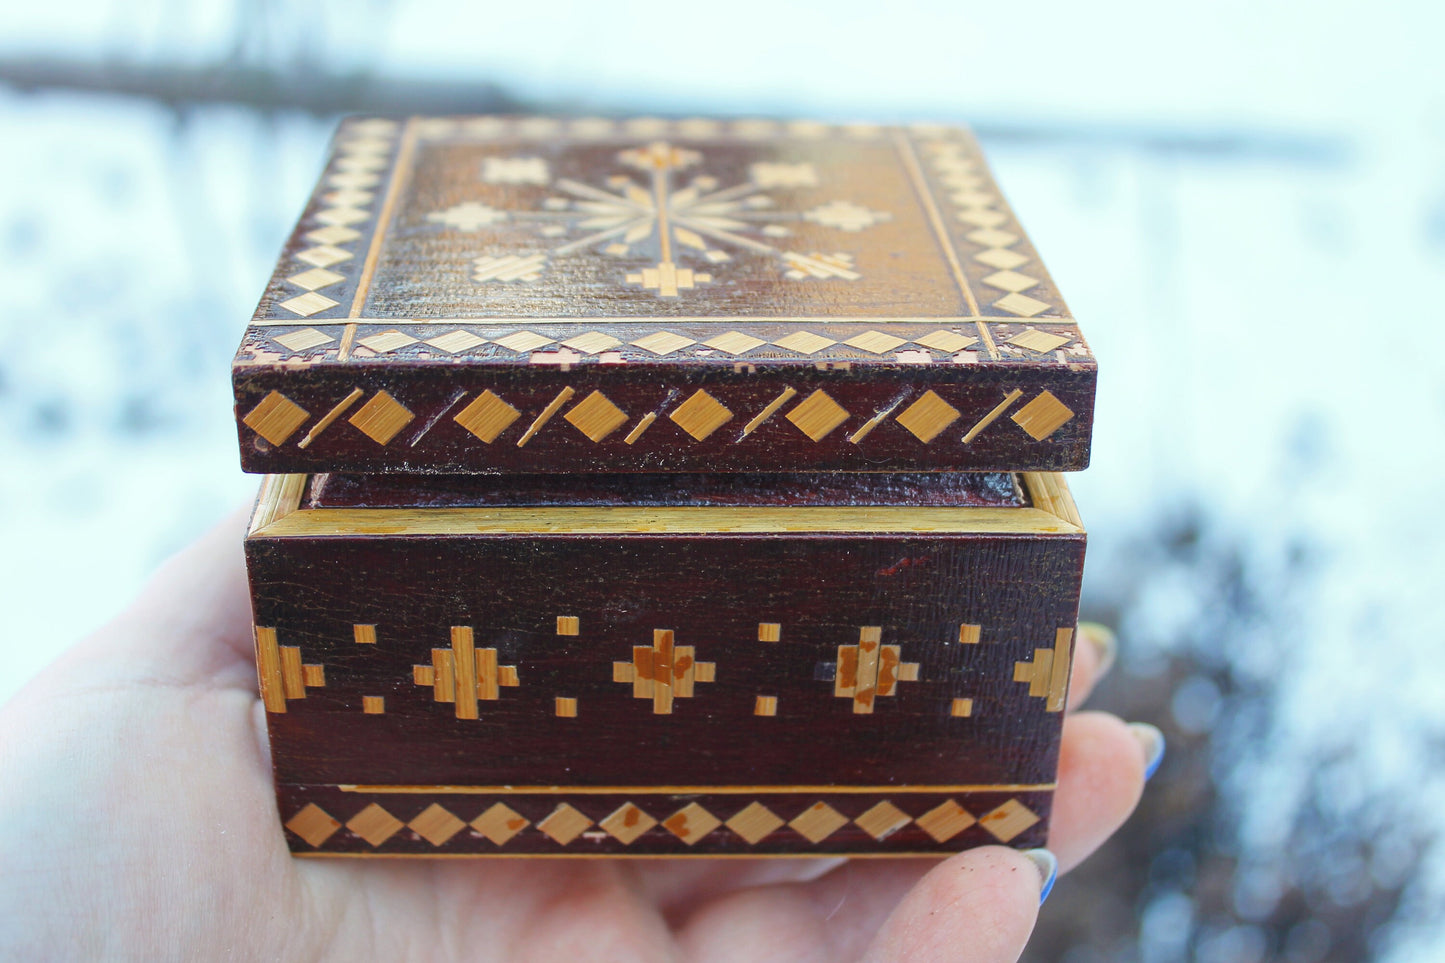 Vintage wooden box 3.5 inches, decorated with straw by handmade - made in Ukraine vintage jewelry box - 1970s